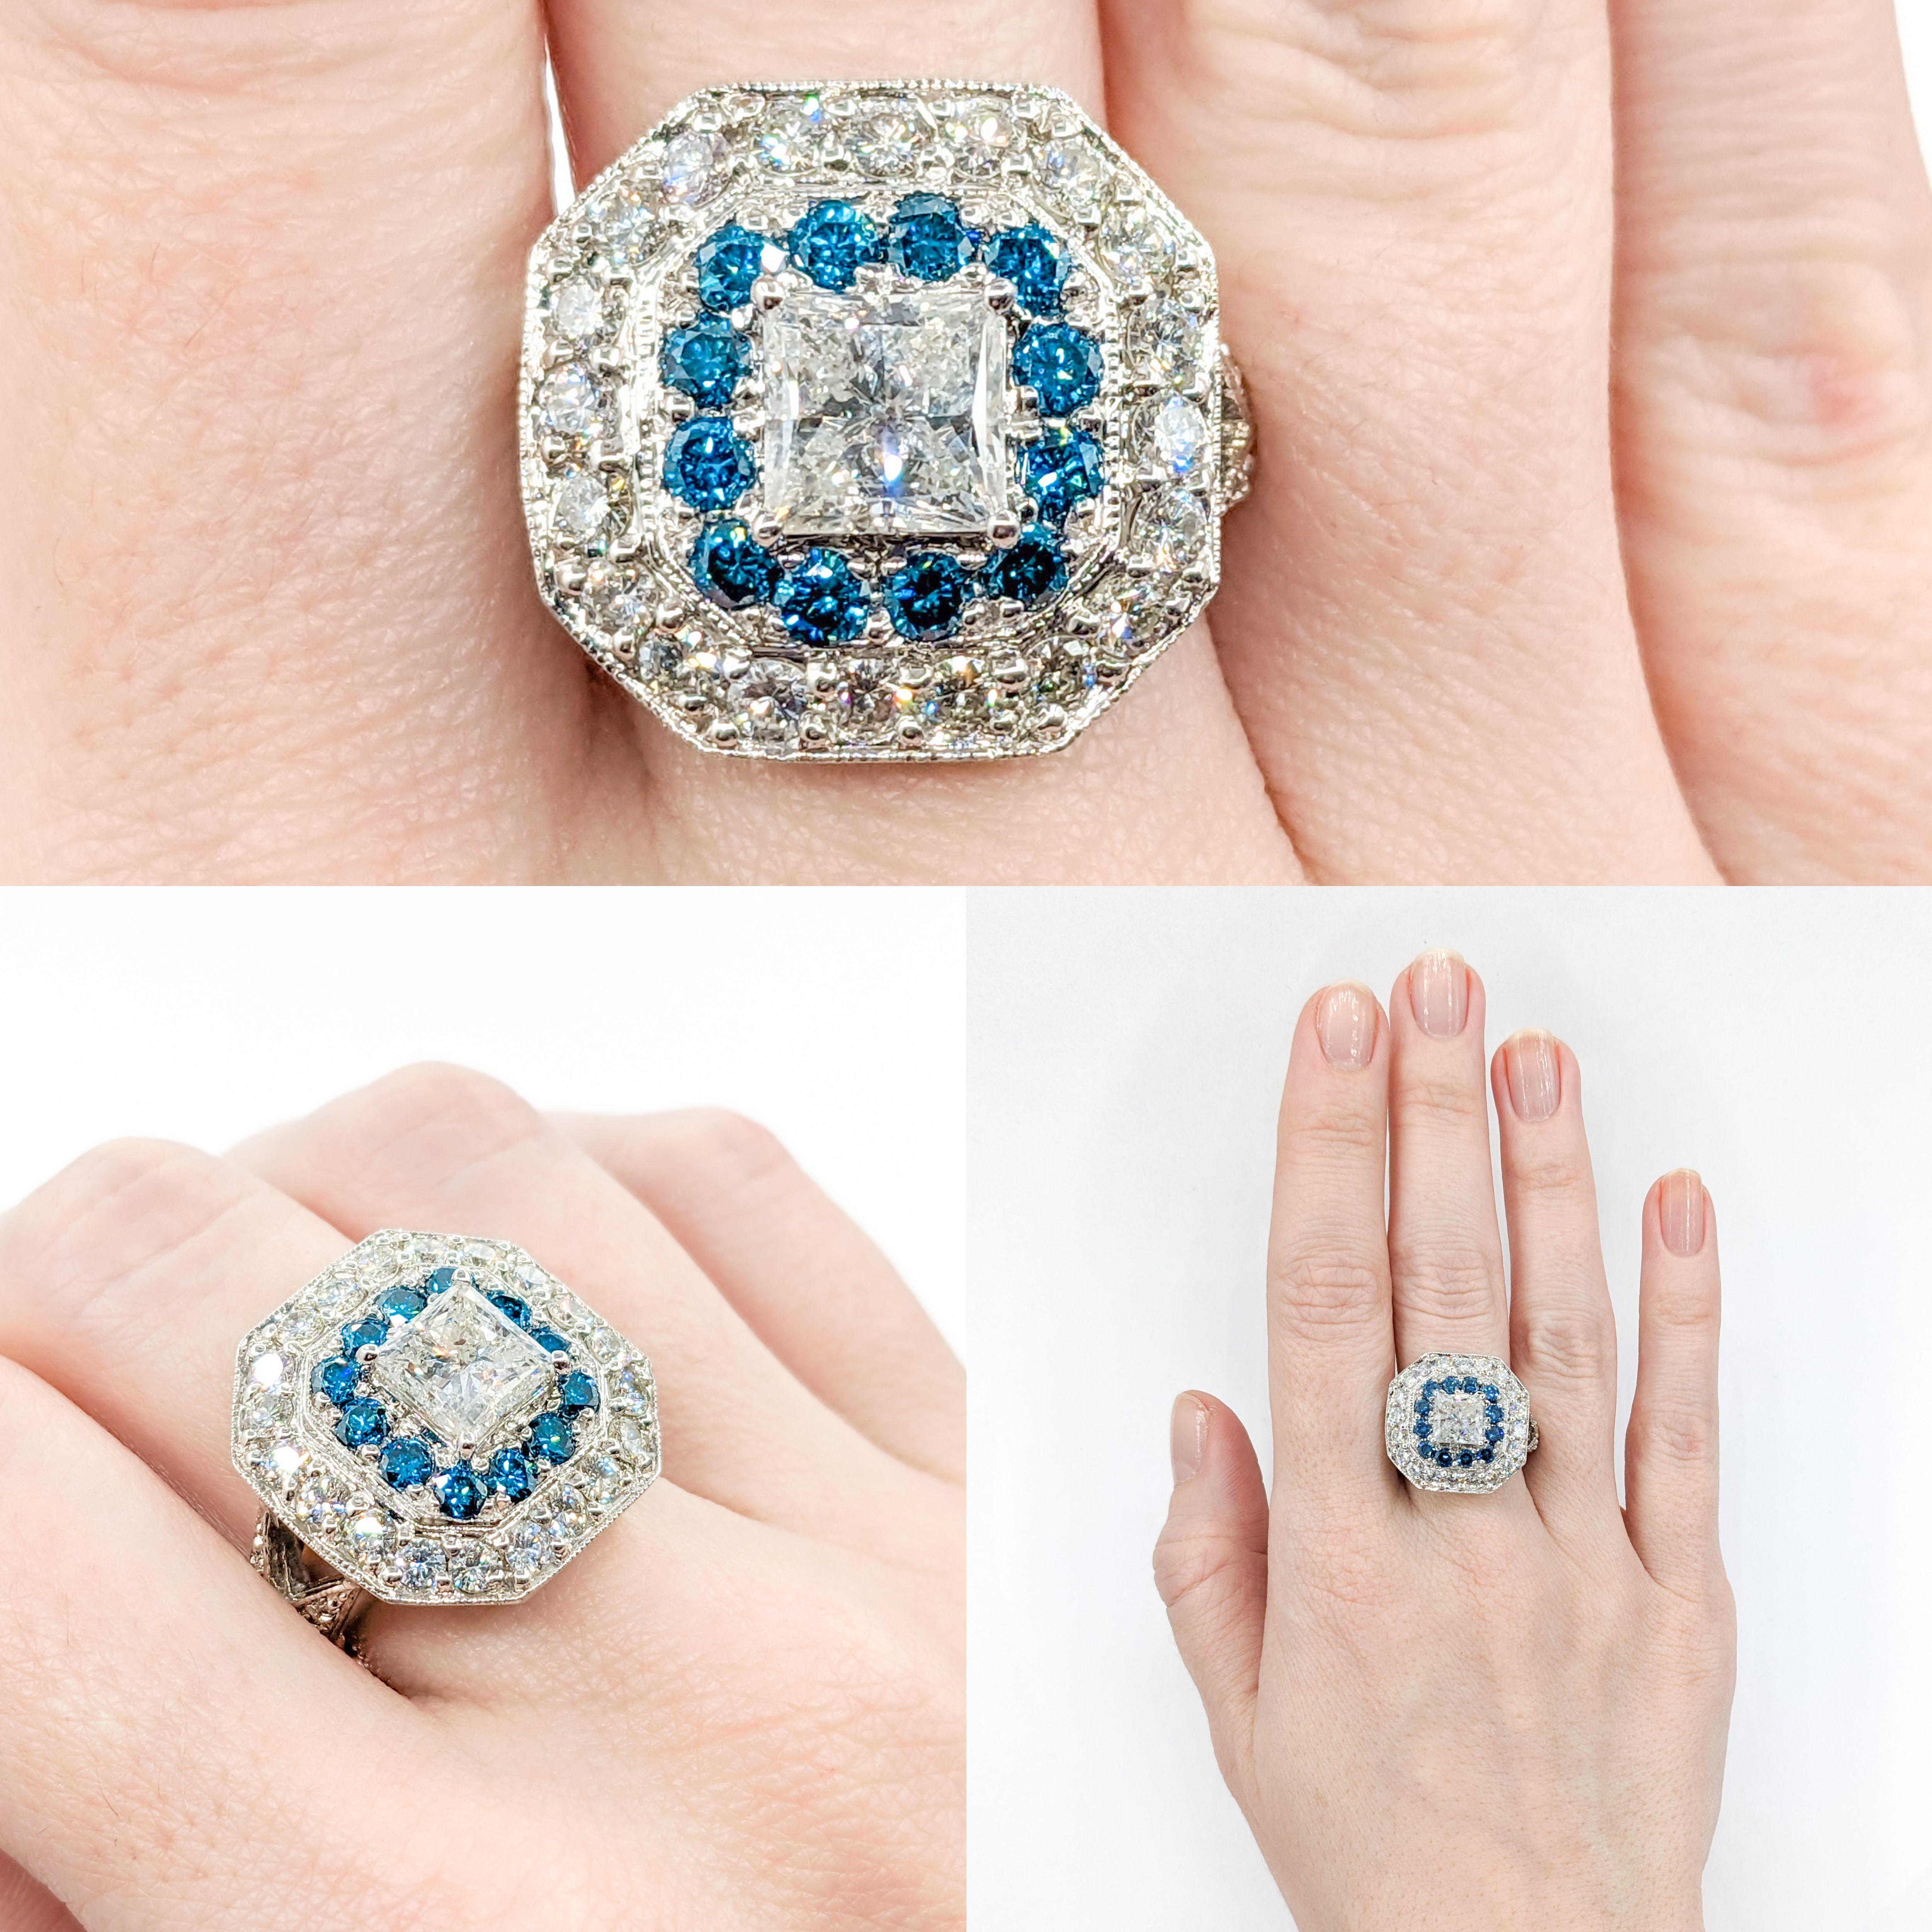 Superb White and Blue Diamond Statement Ring
This incredible ring is crafted in 14kt white gold and features an impressive 2.02ct princess-cut white diamond center stone. This ring also features 2.61ctw round white & blue diamonds, SI1 clarity, H